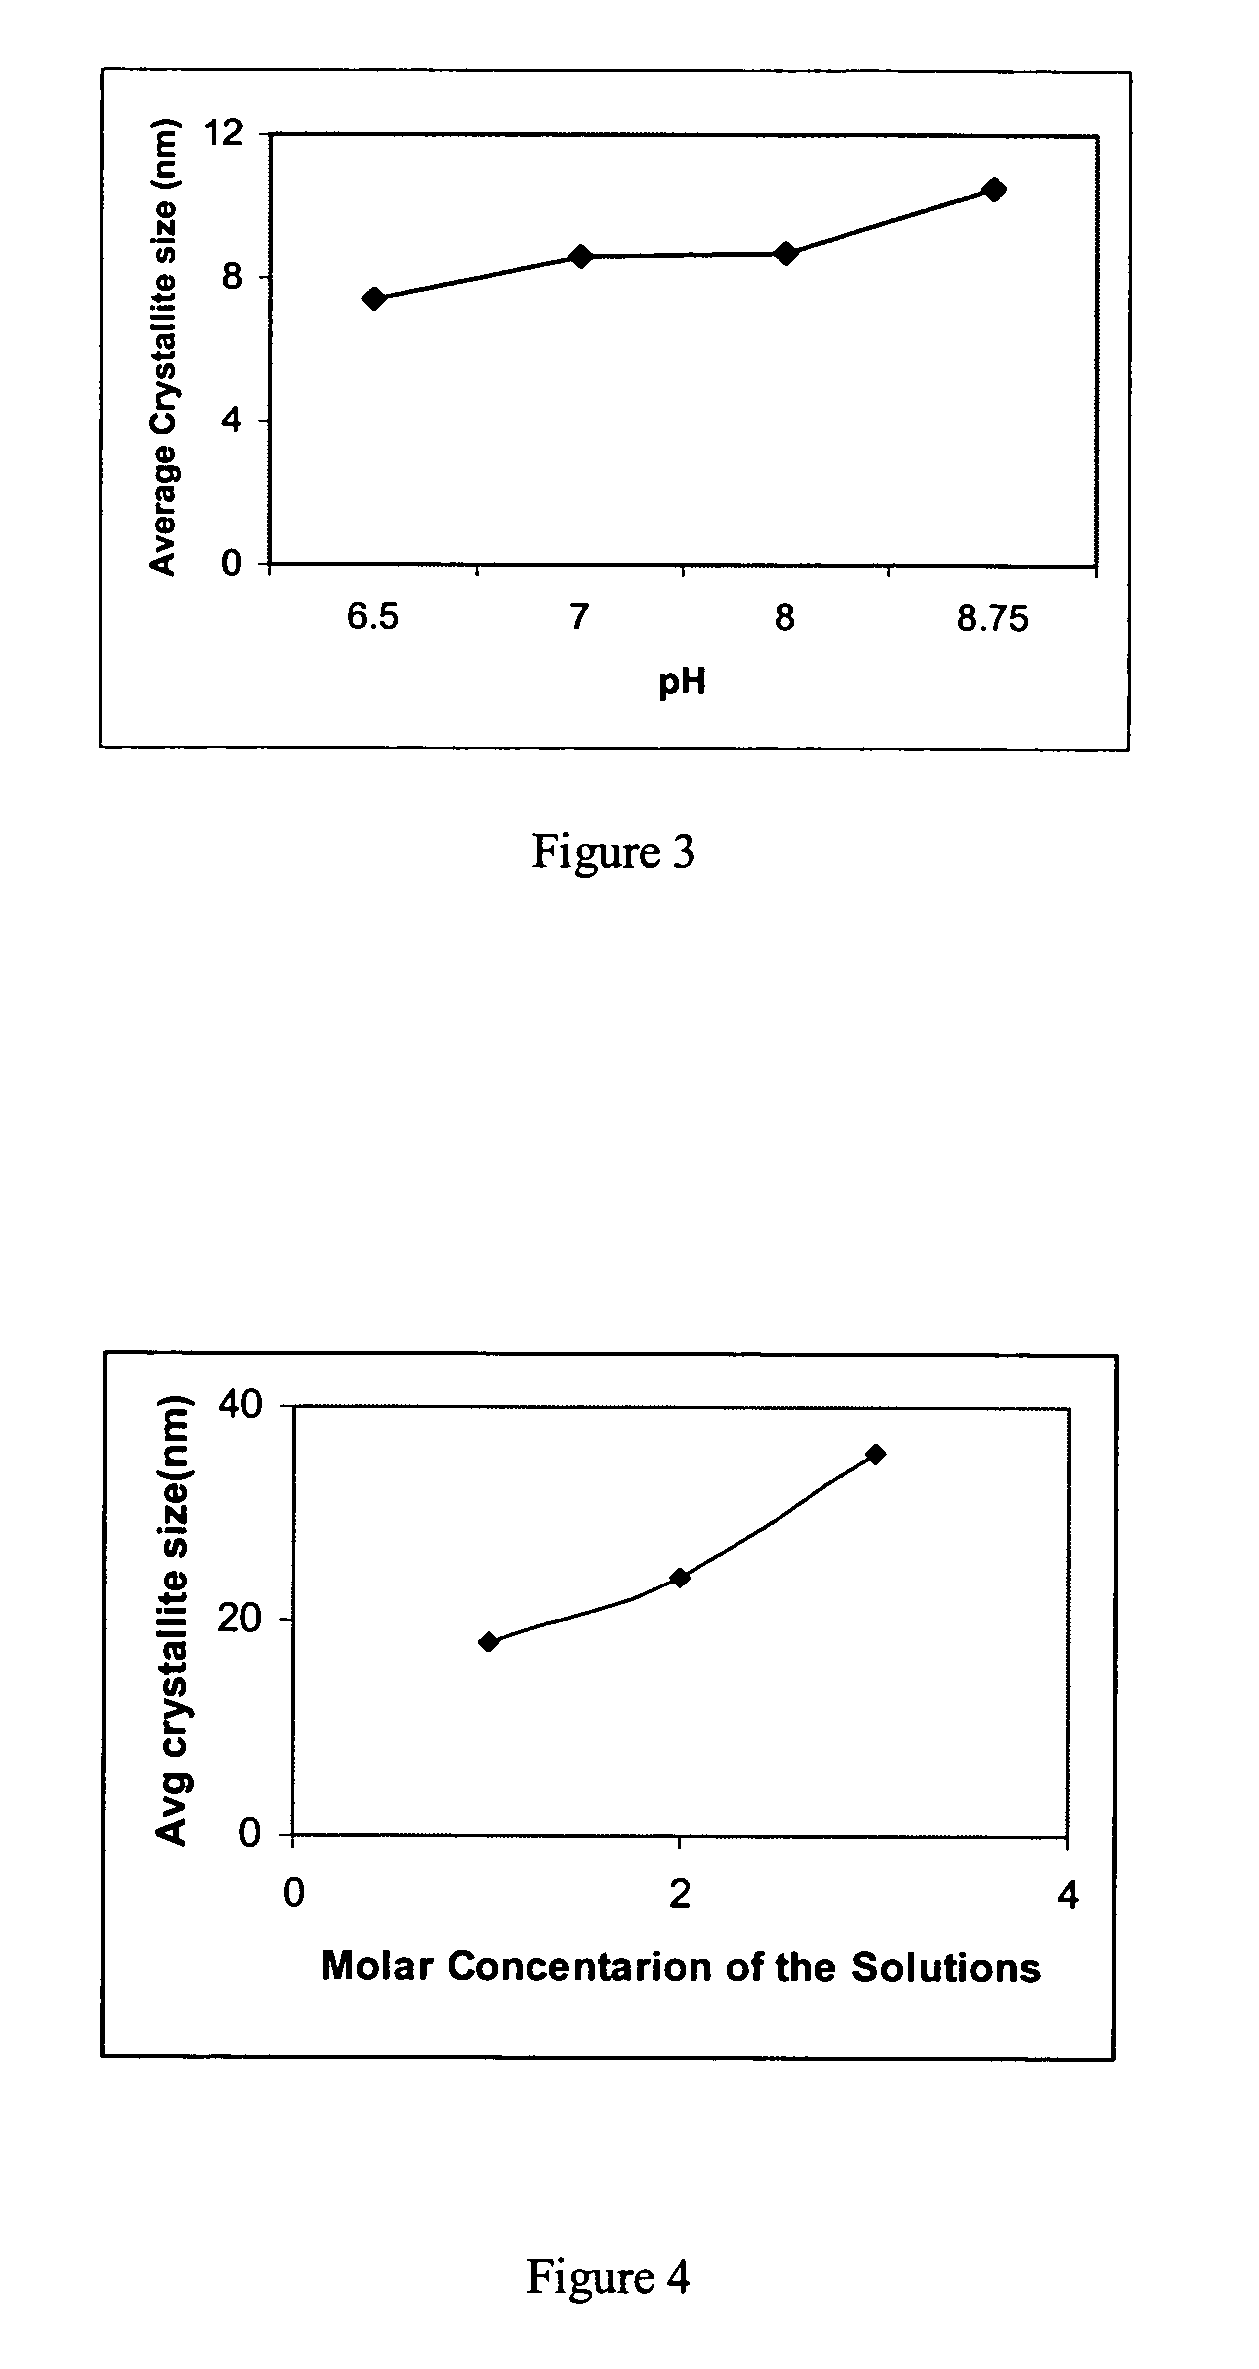 Attrition resistant bulk metal catalysts and methods of making and using same